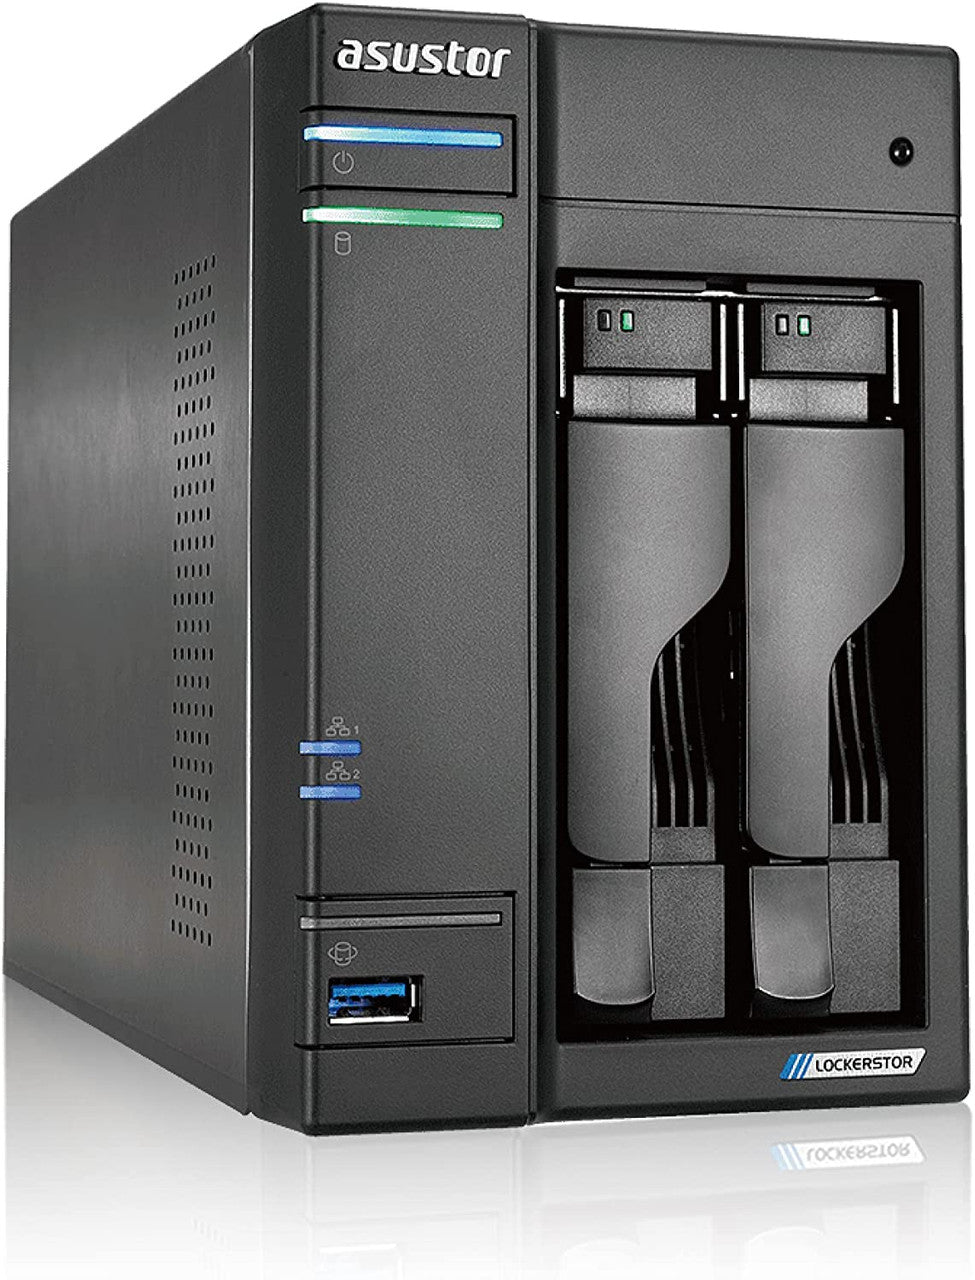 Asustor AS6602T 2-Bay Lockerstor 2 NAS with 4GB RAM and 4TB (2x2TB) Seagate Ironwolf NAS Drives